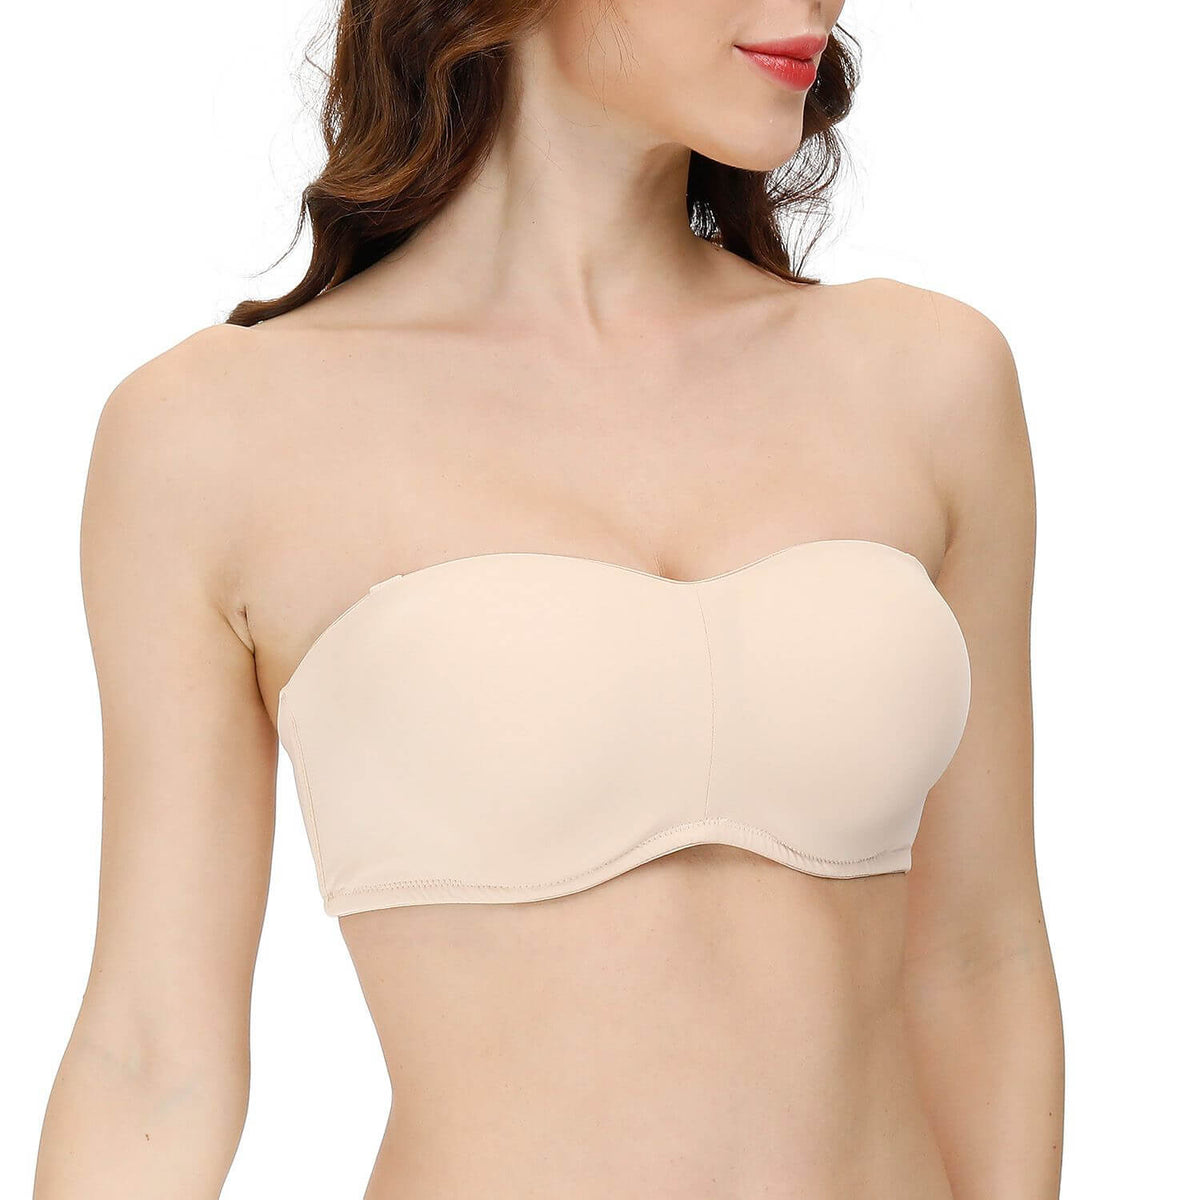 woman with strapless convertible bandeau bra